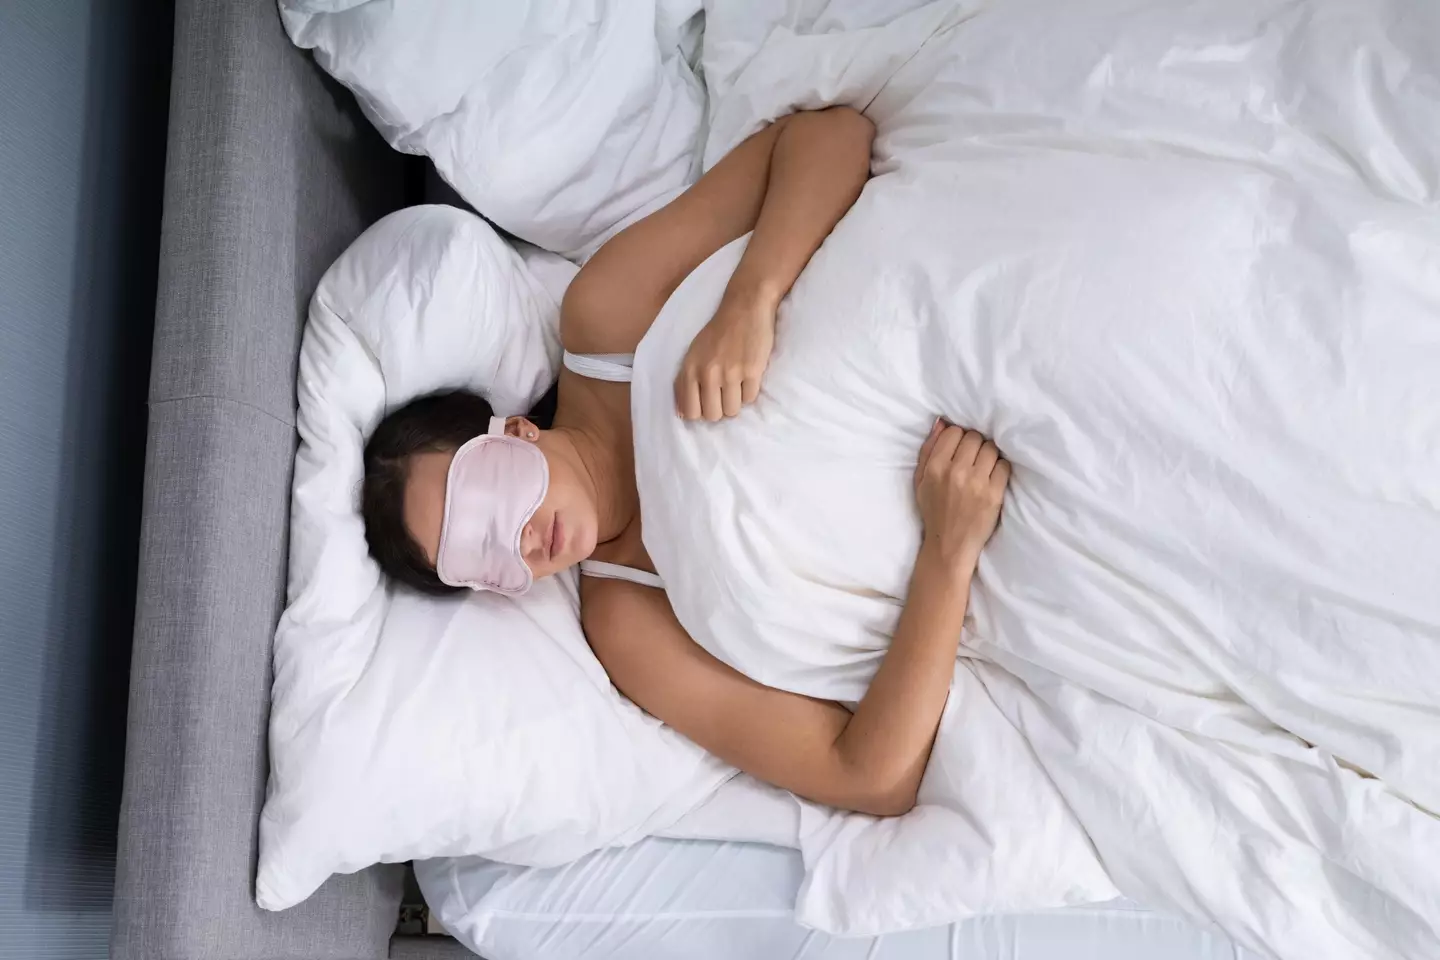 If you struggle to fall asleep, this technique could be the answer.